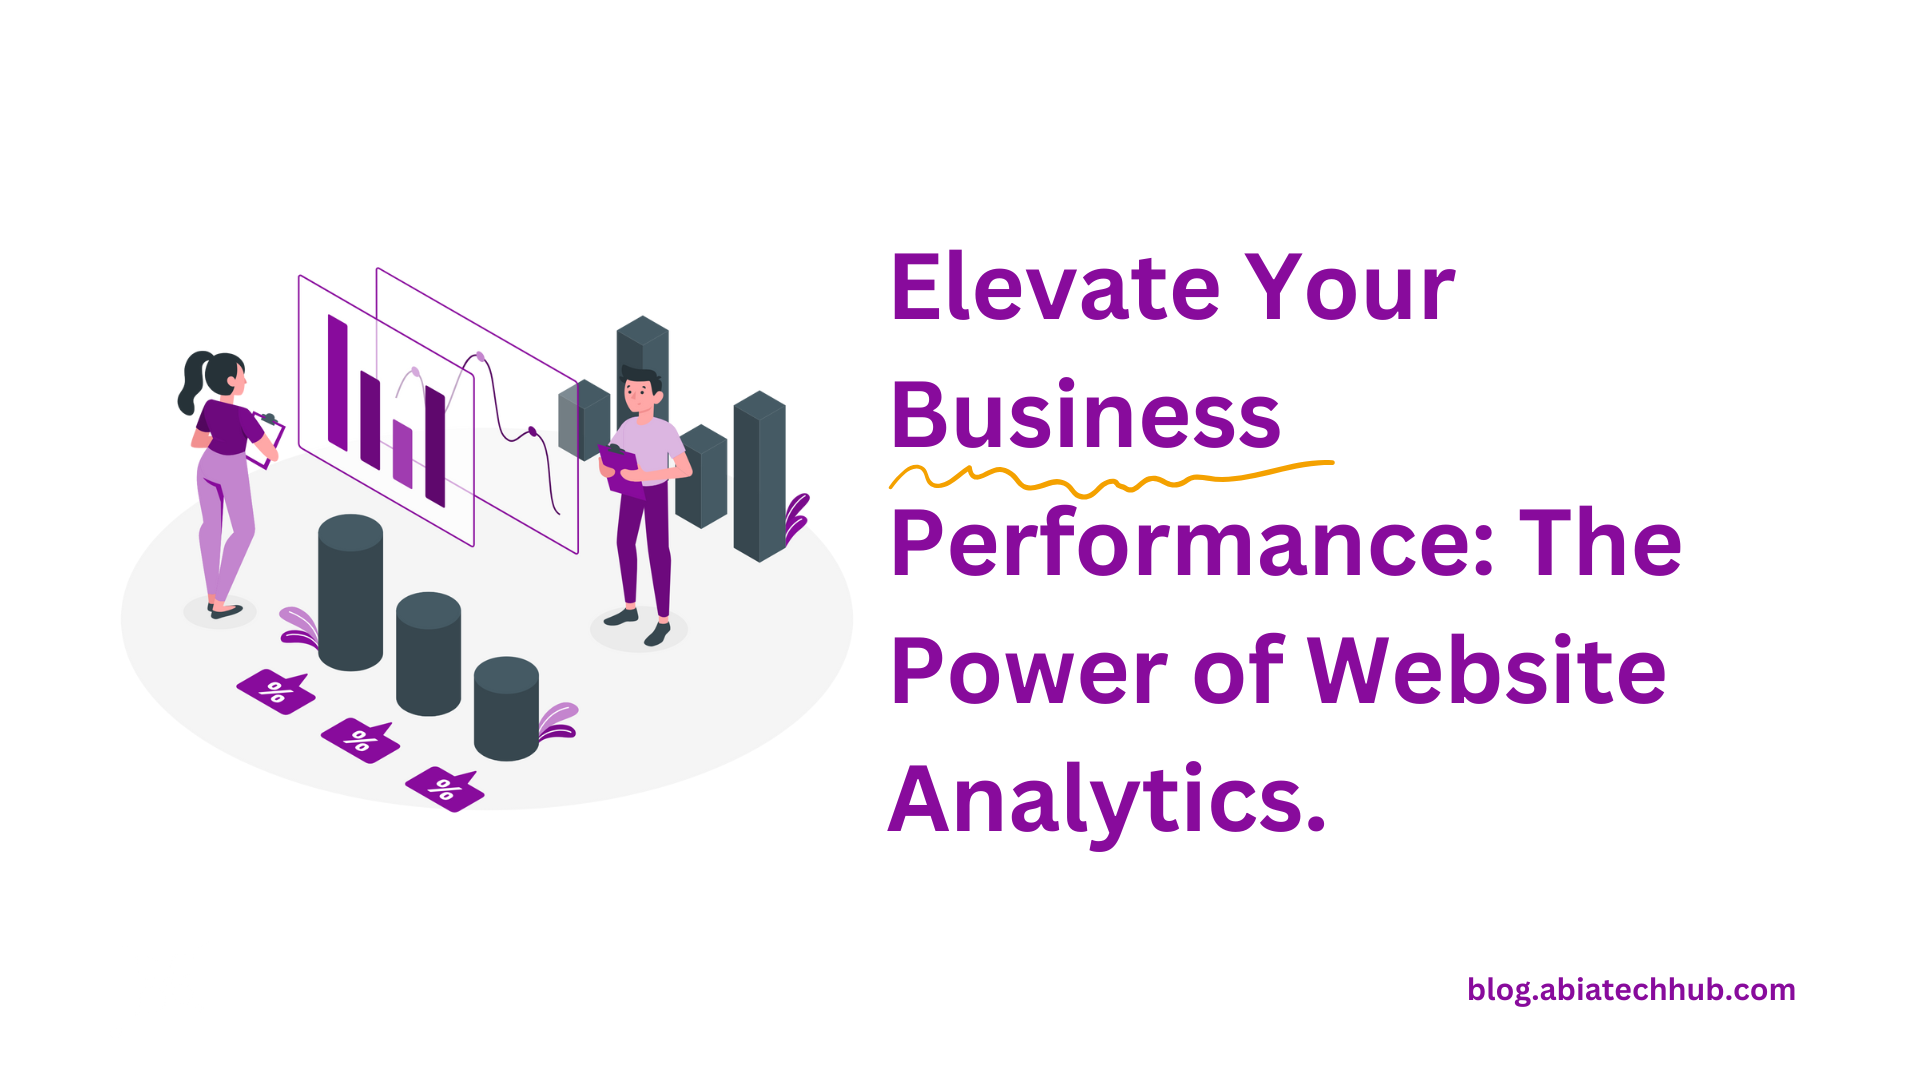 Elevate Your Business Performance: The Power of Website Analytics